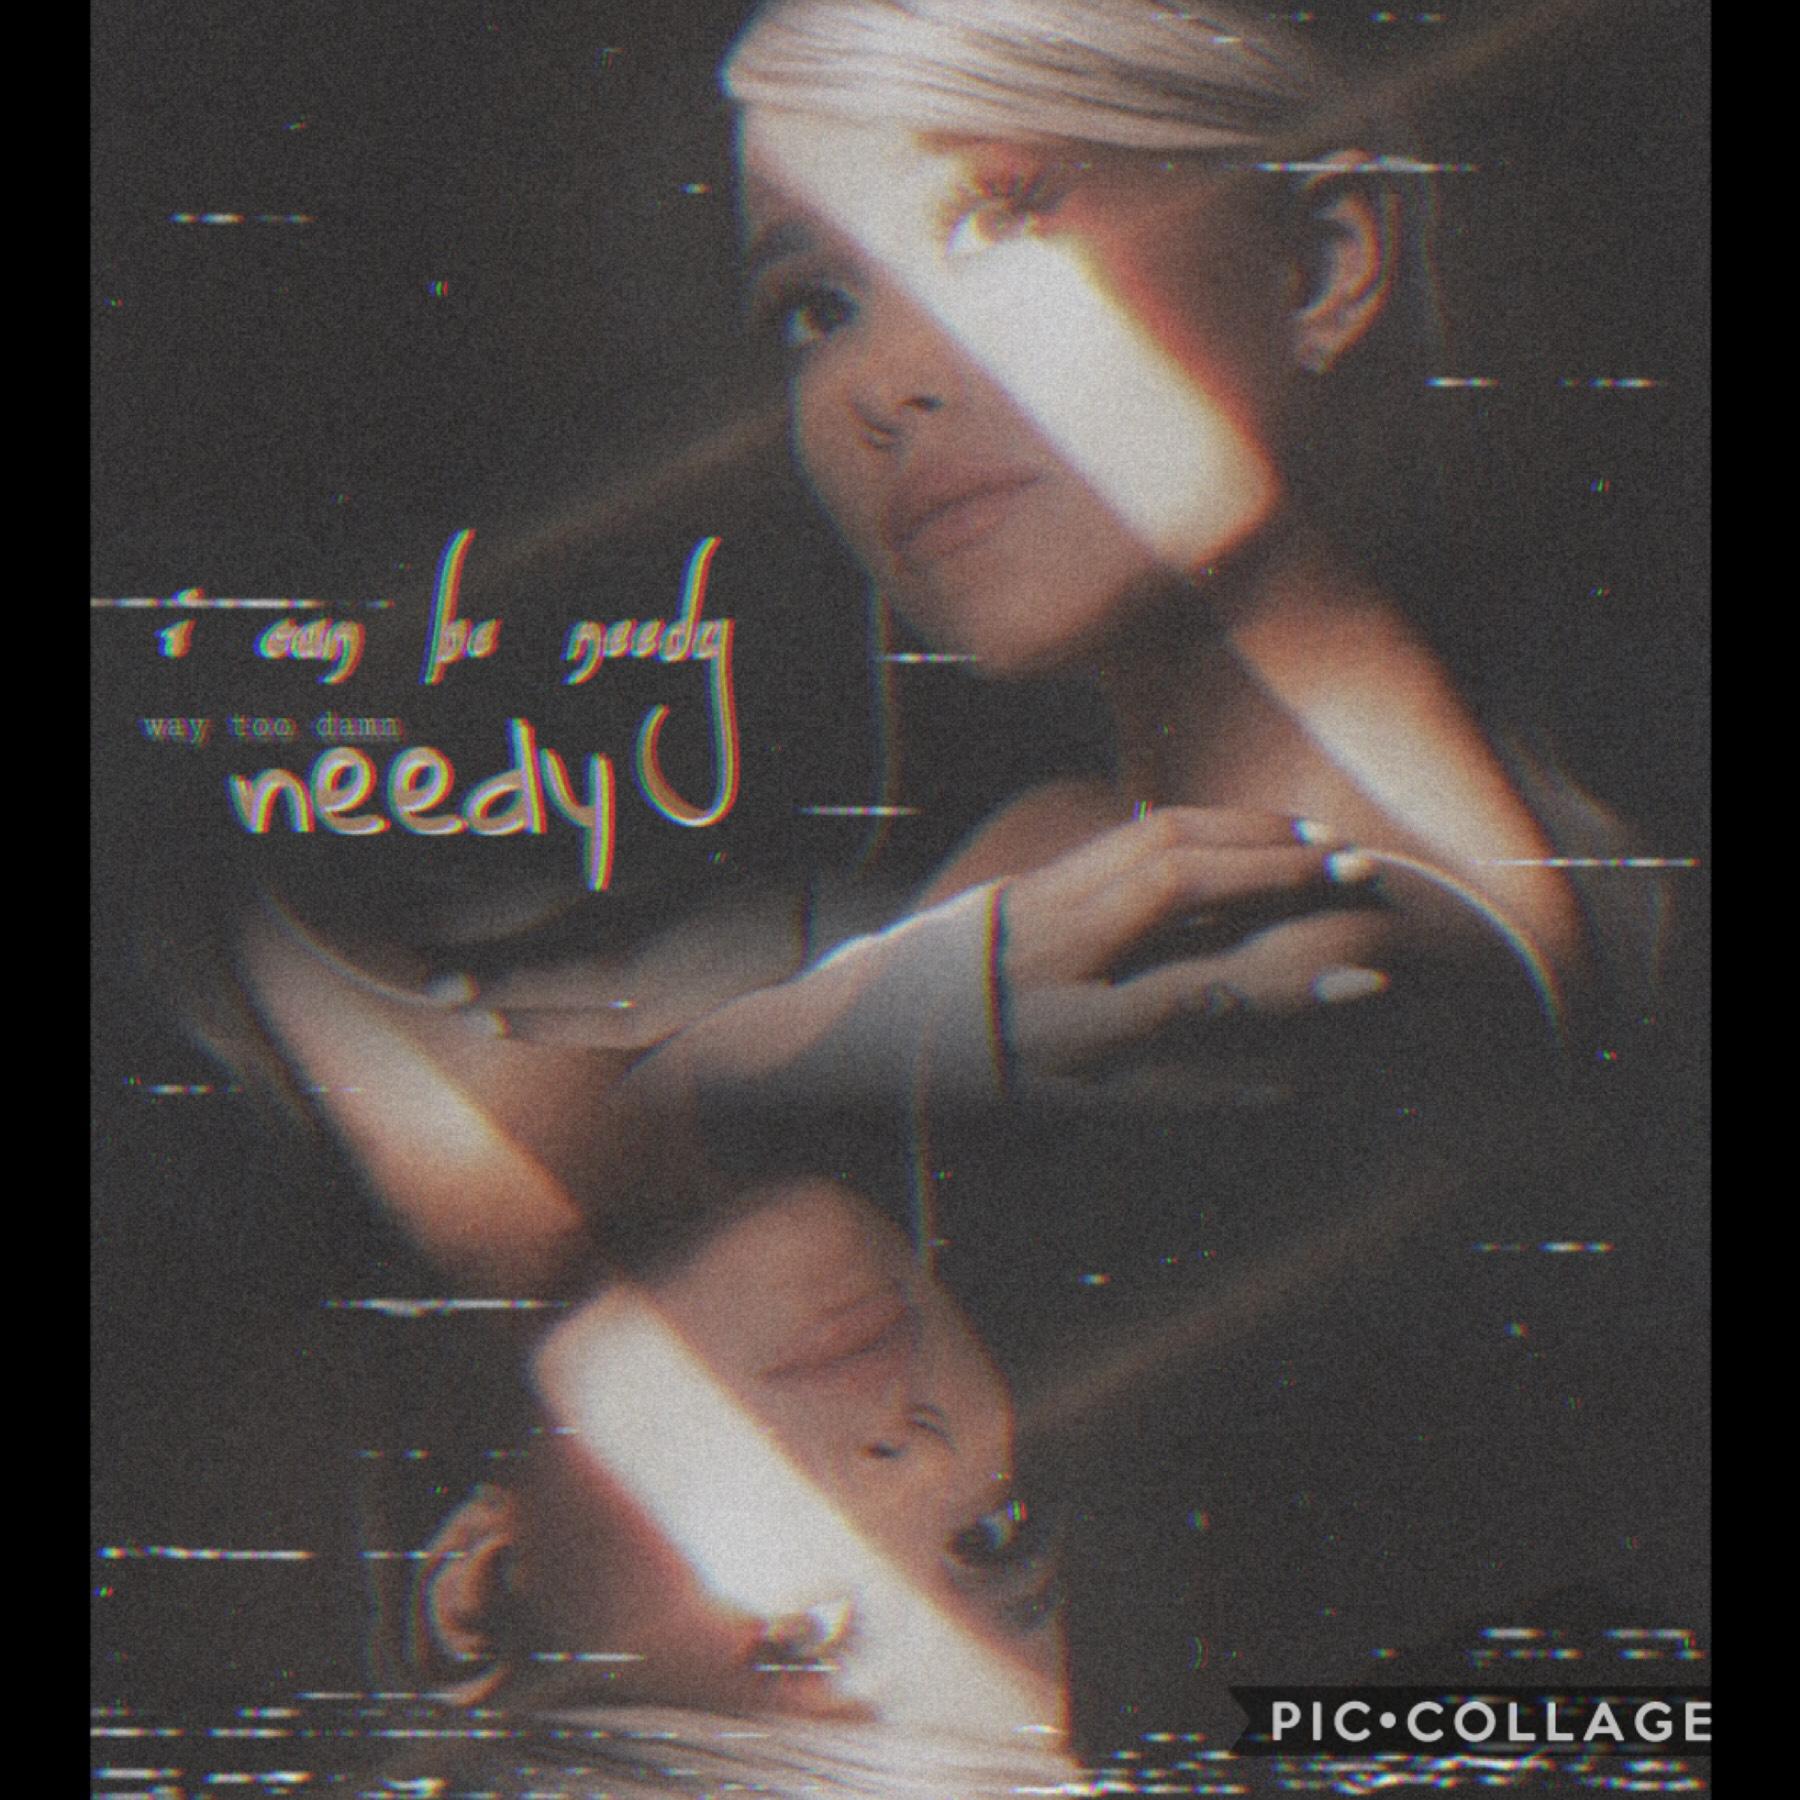 who else has been listen to grande’s new music?? what’s your favorite song off the album? 
background: SplitPic. editing/text: PicsArt